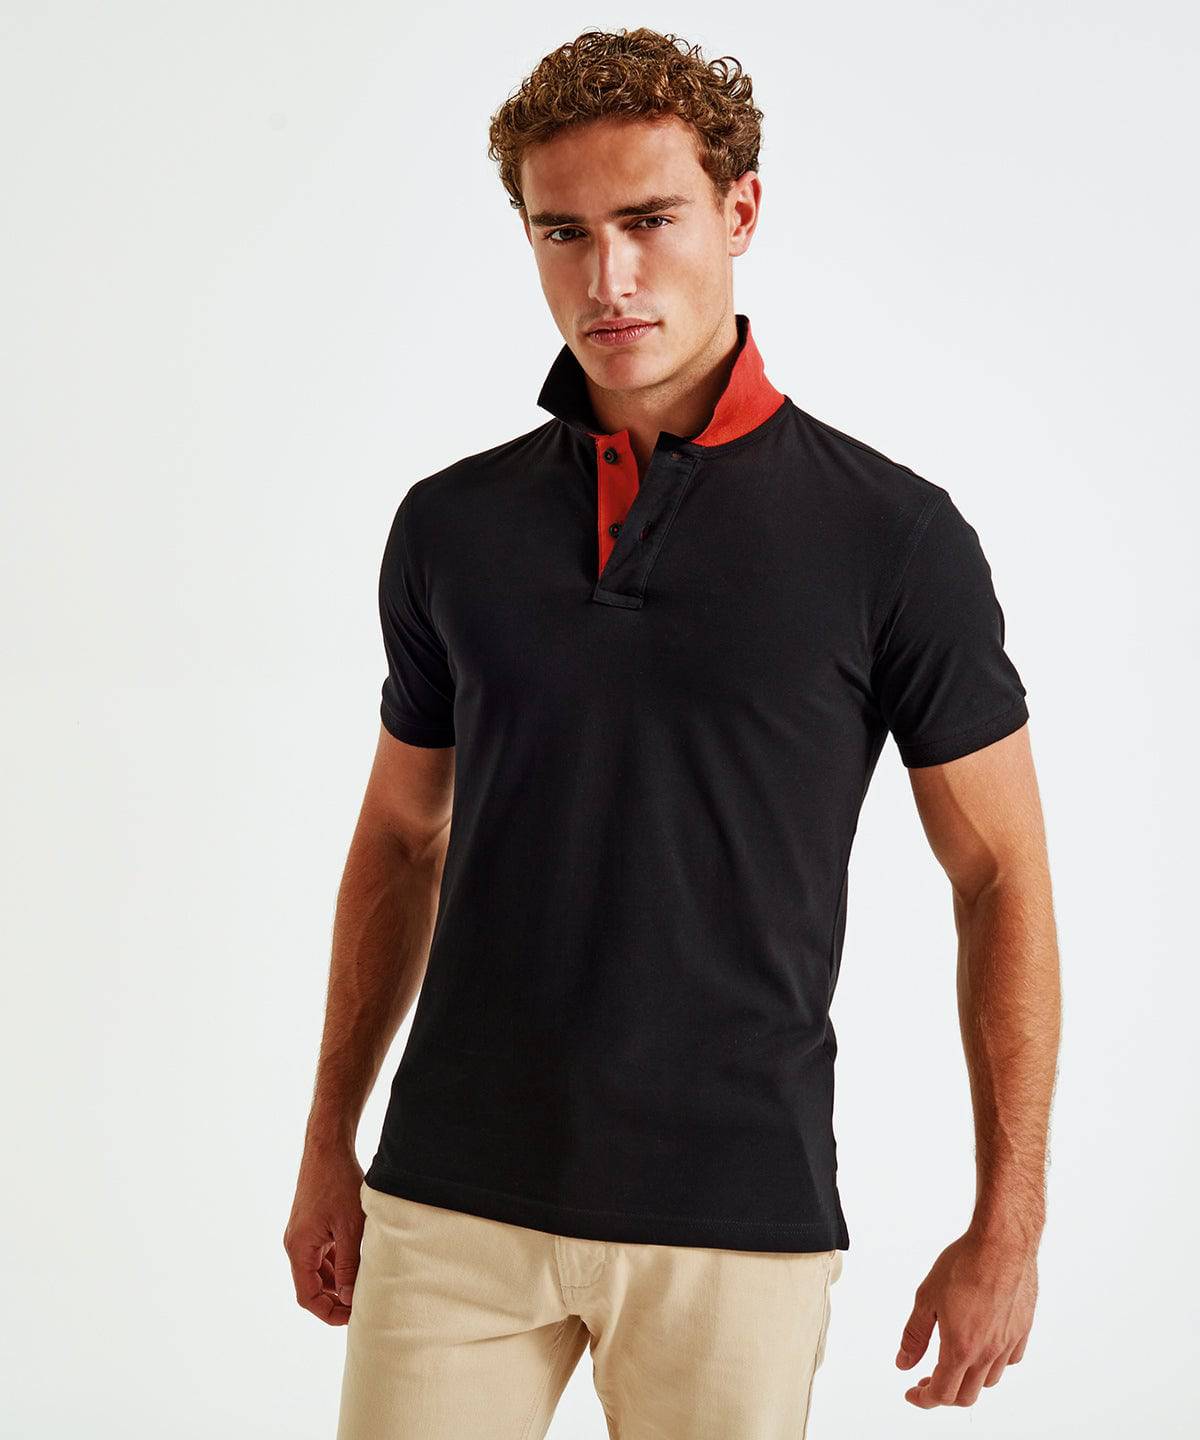 Navy/Red - Men's classic fit contrast polo